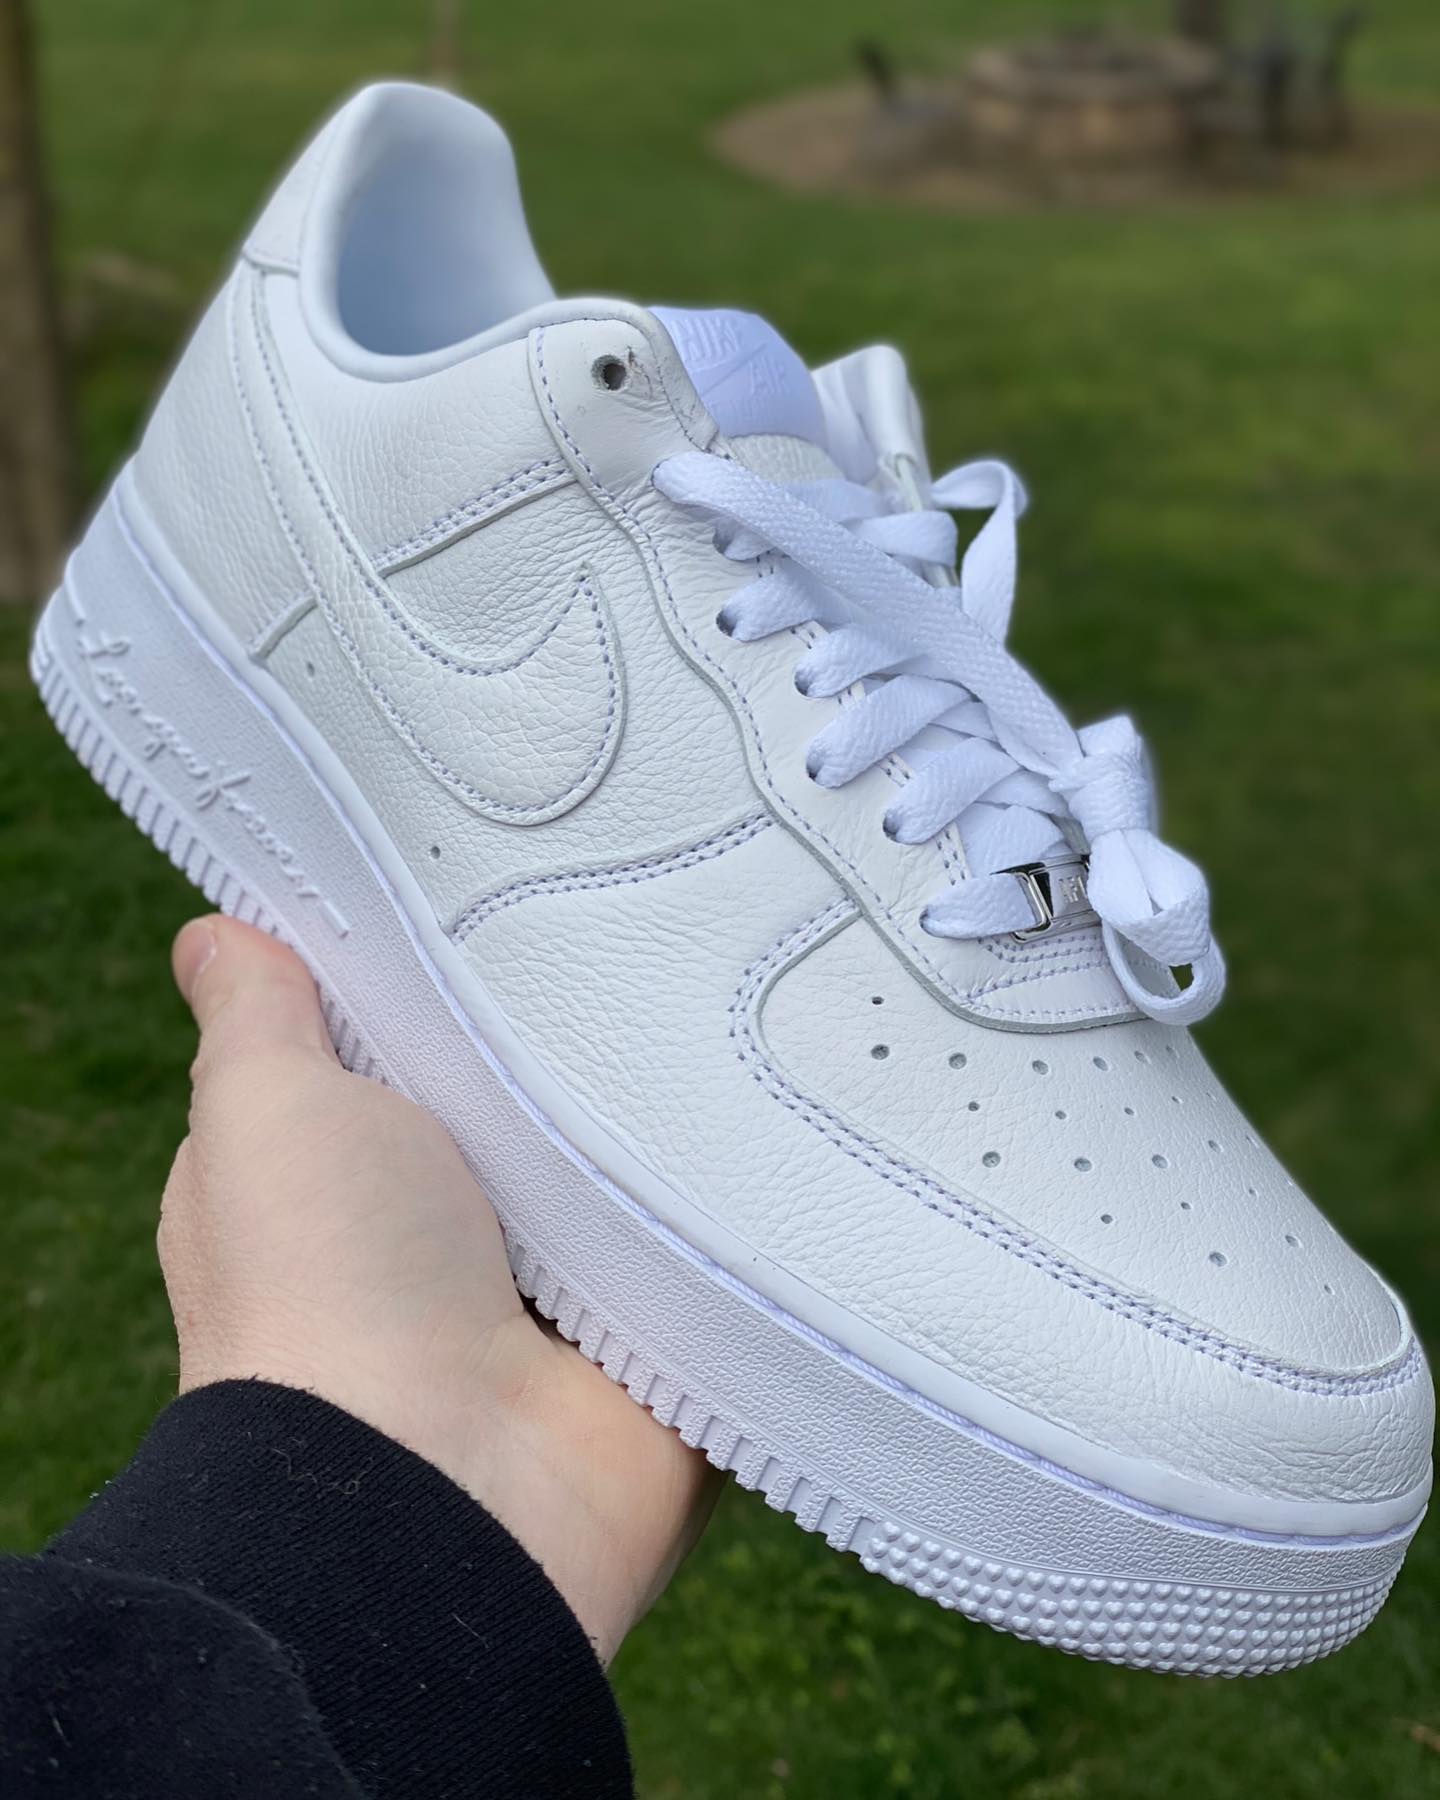 Drake Nocta x Nike Air Force 1 Low 'Certified Lover Boy' Release Date 2022  | Sole Collector